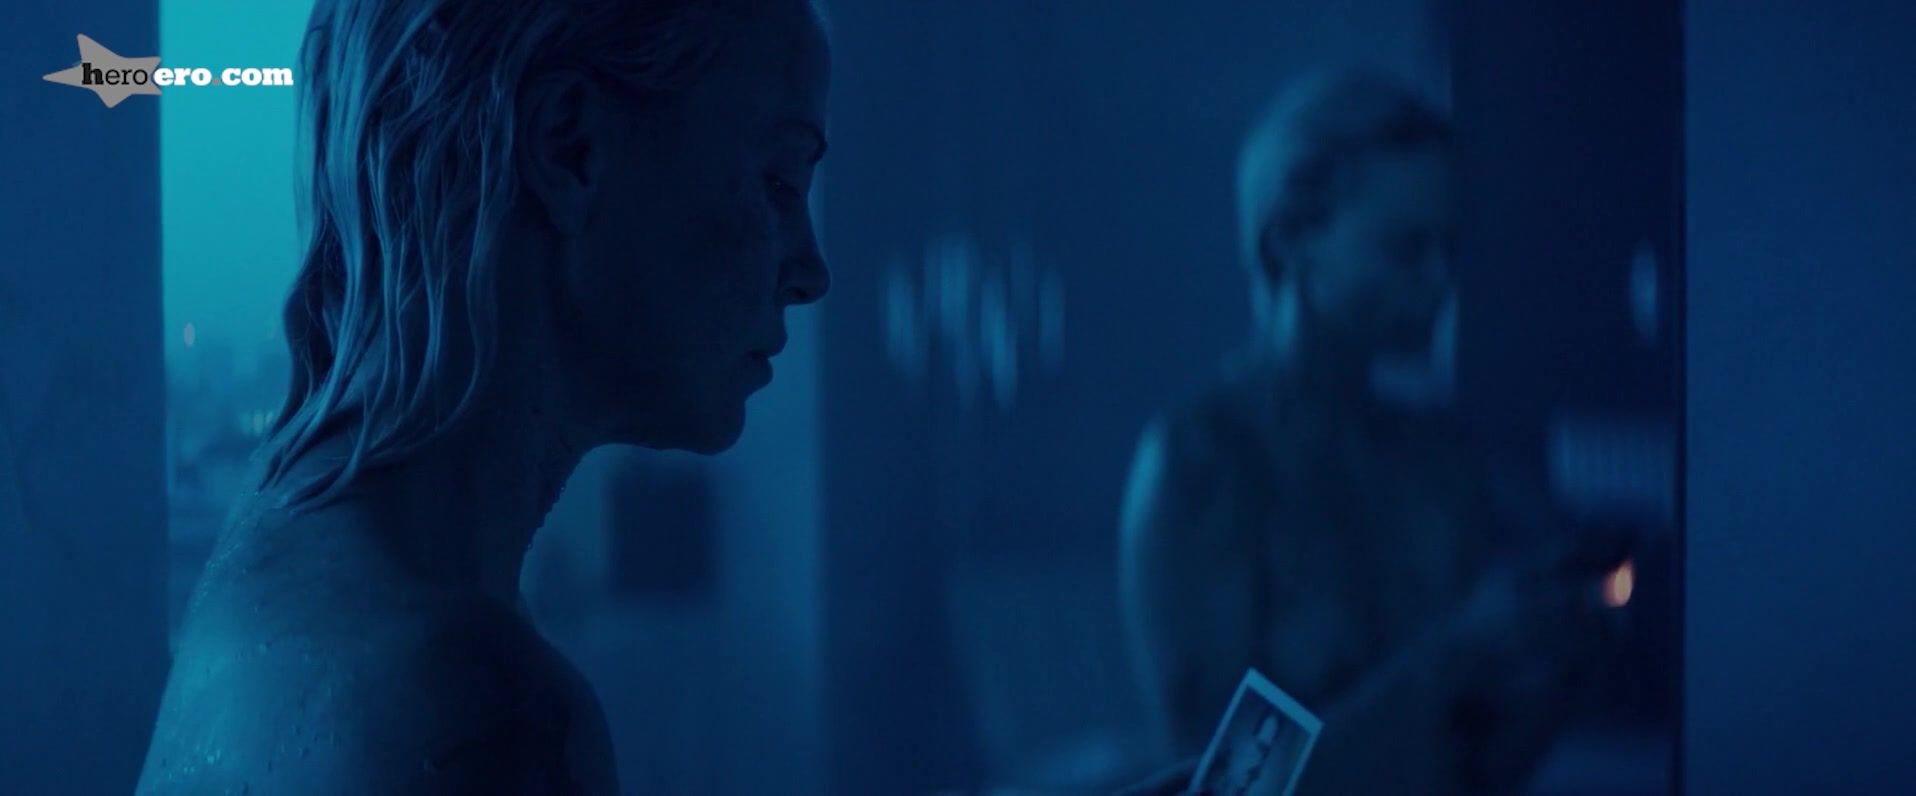 Real Amatuer Porn Charlize Theron, Sofia Boutella Nude - Atomic Blonde (US 2017) 9Taxi - 1